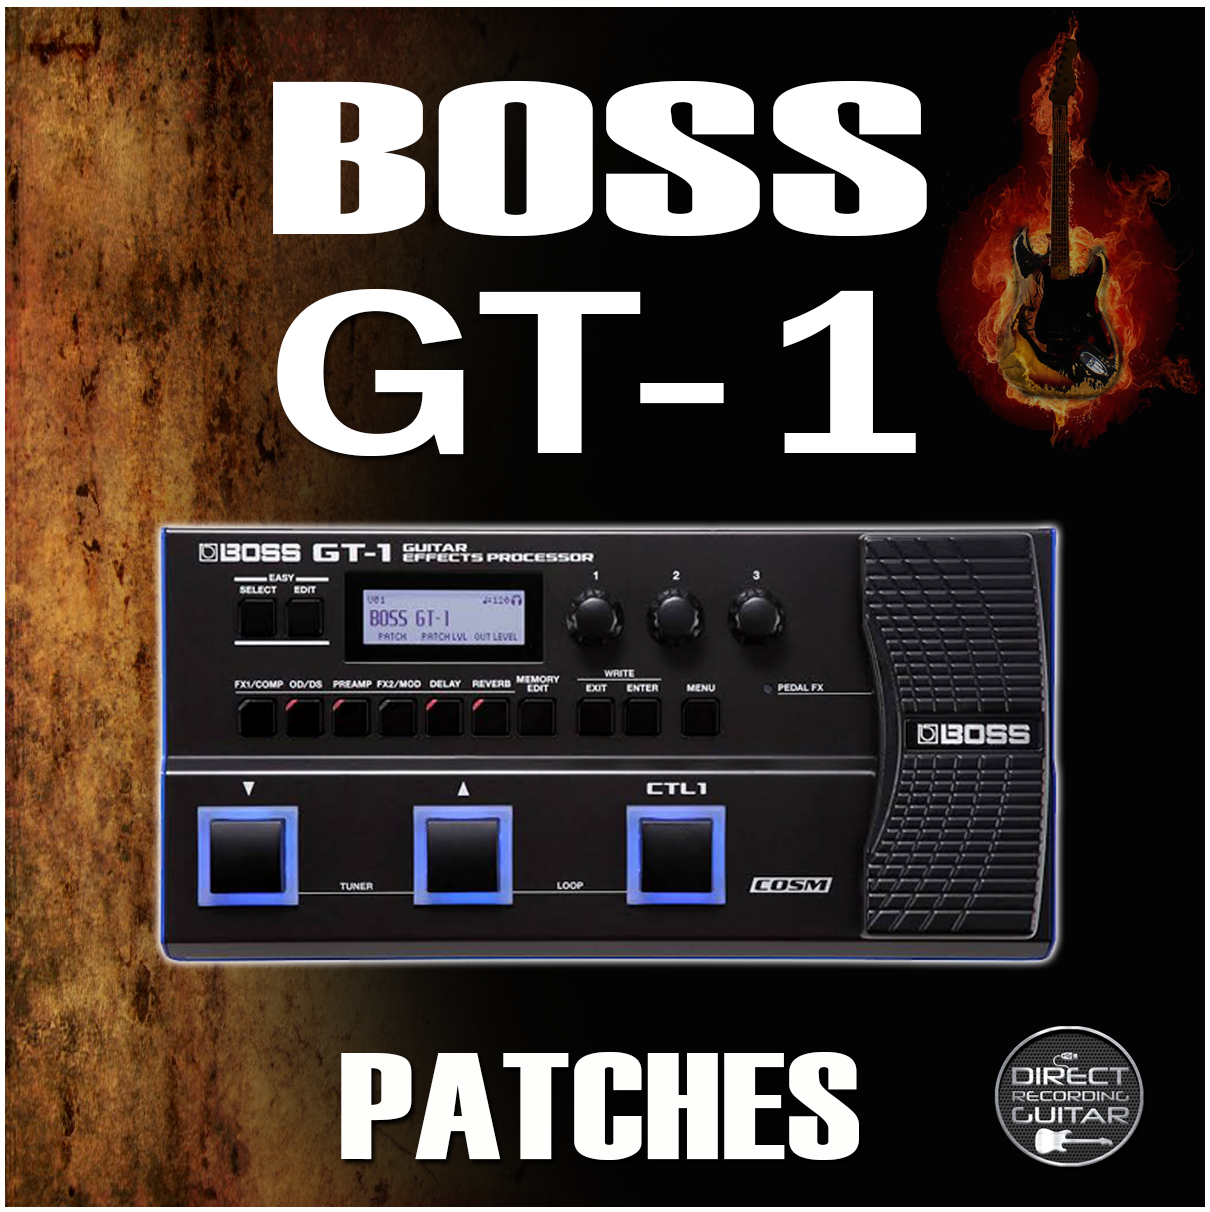 BOSS GT 1 Patches Guitar Presets - Payhip